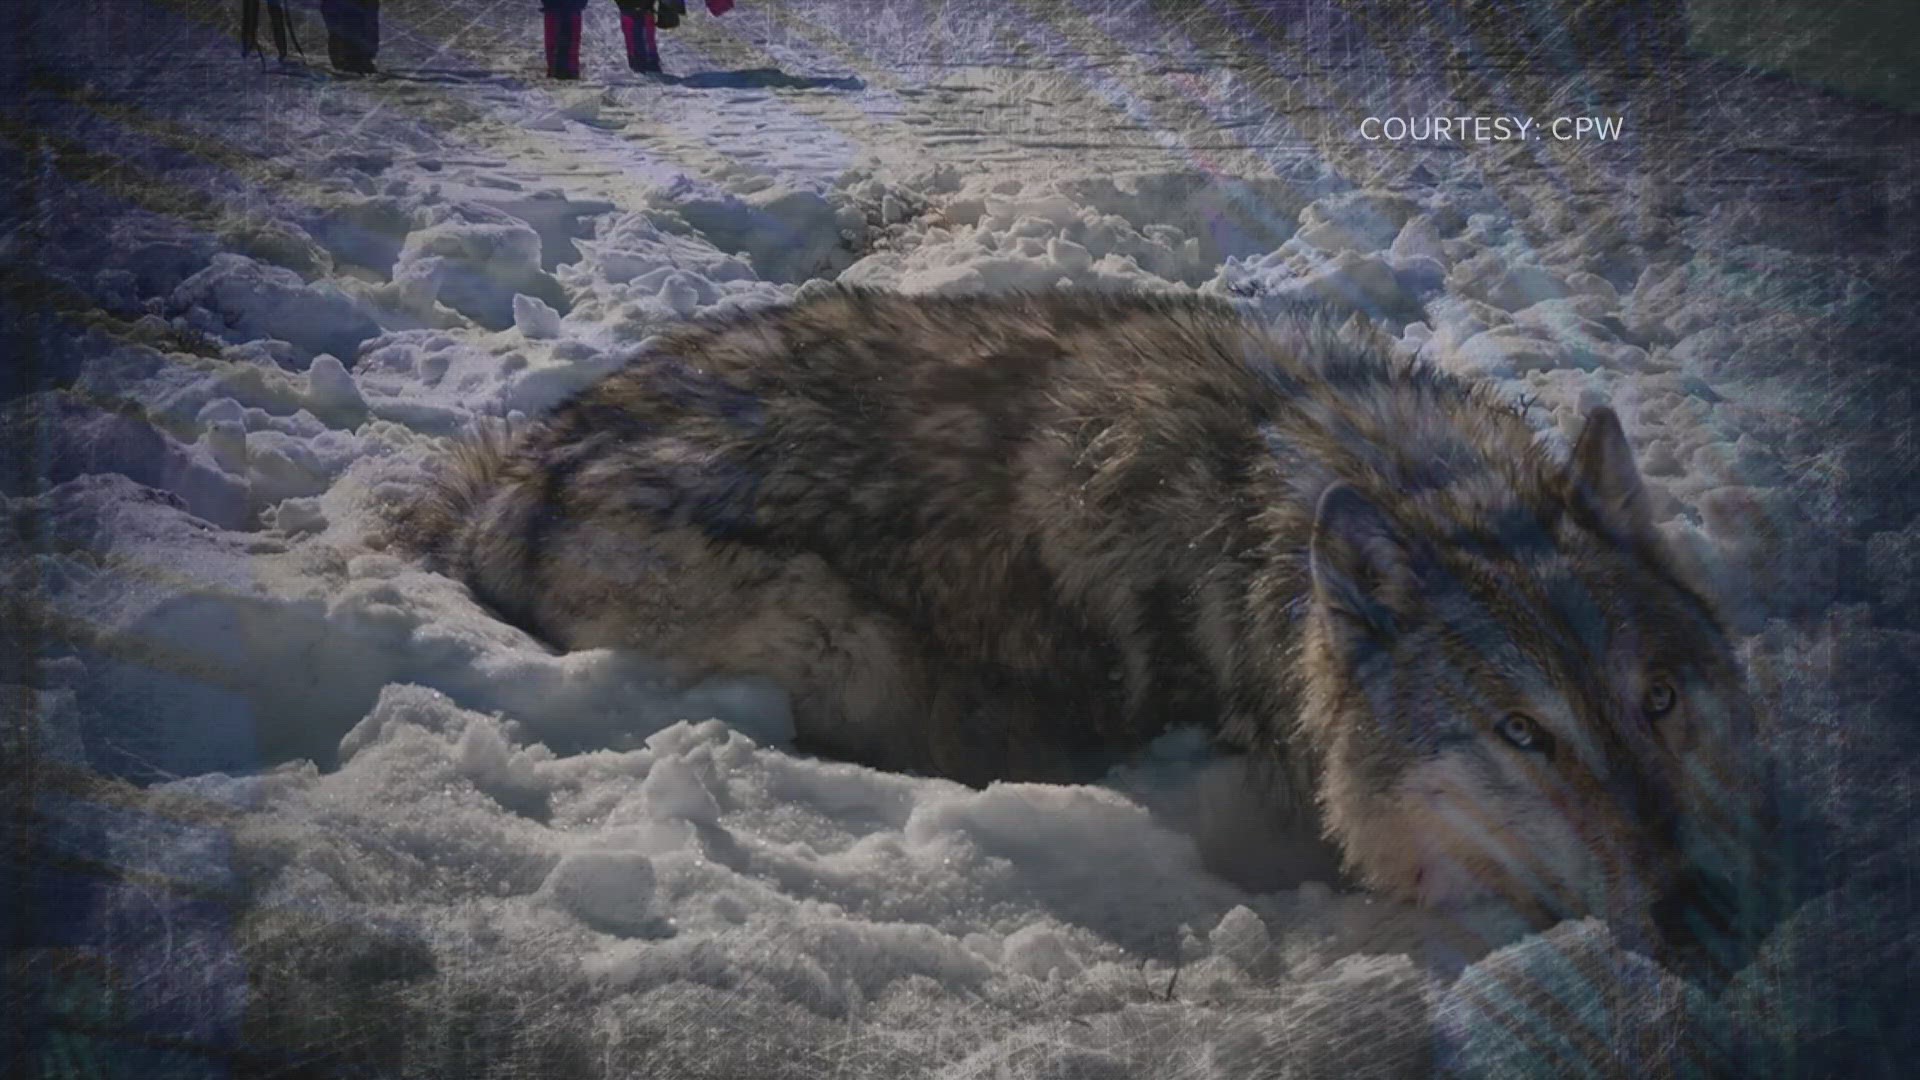 CPW announced an agreement with Indigenous tribes, the Confederated Tribes of the Colville Reservation, to catch up to 15 wolves next capture season.